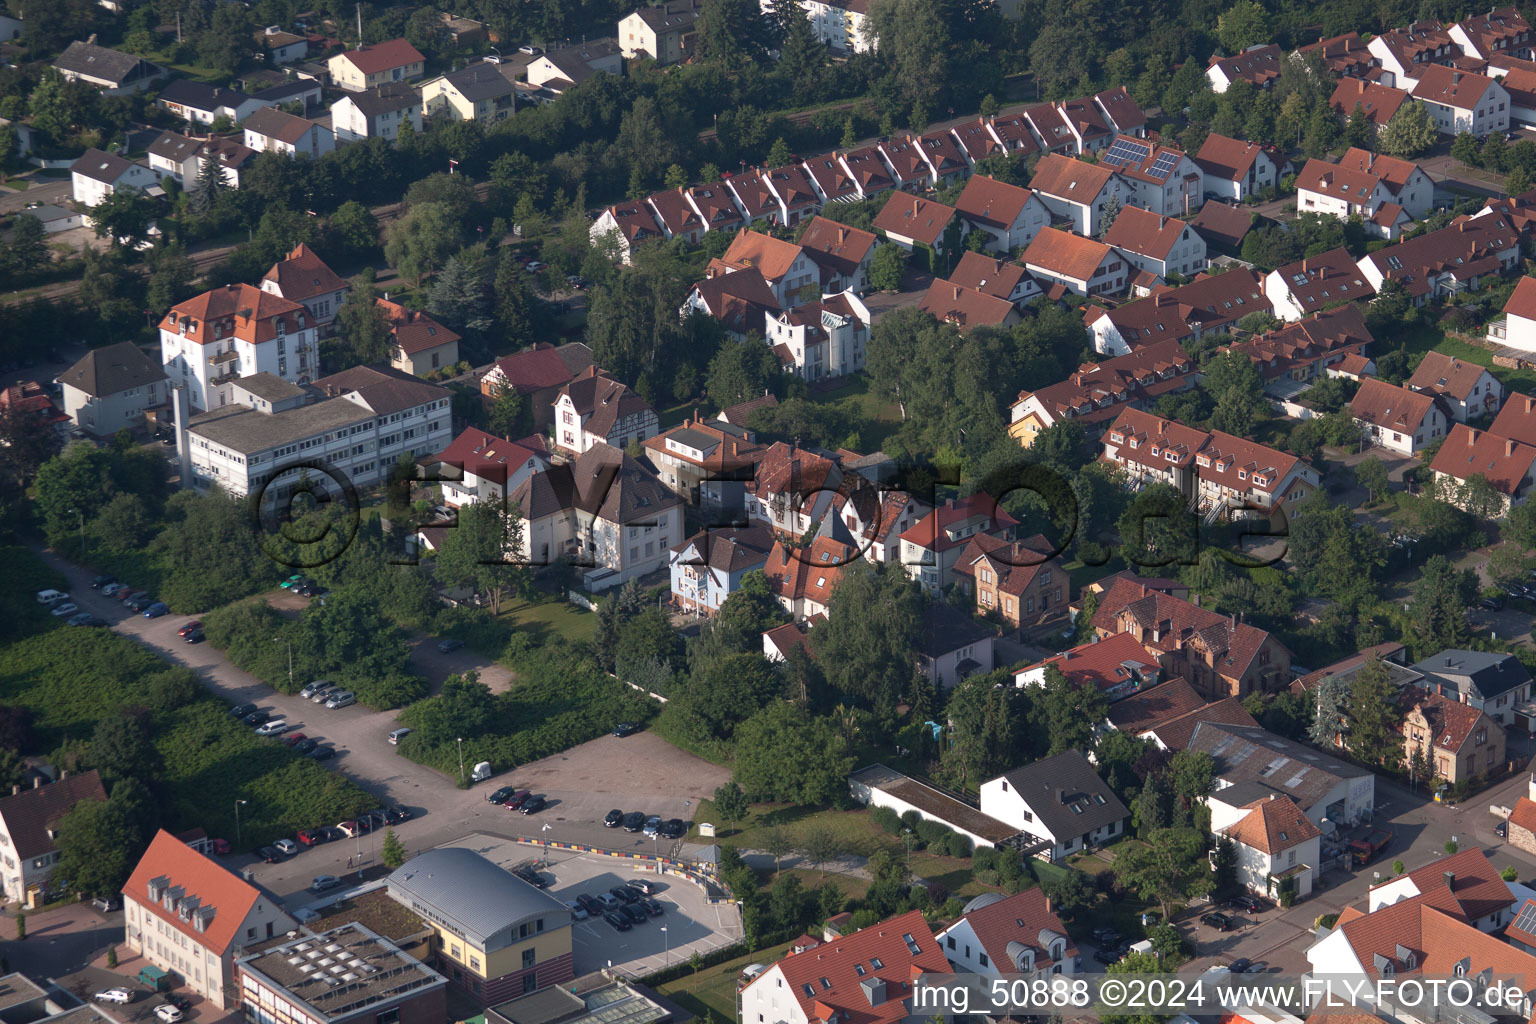 Bismarckstr in Kandel in the state Rhineland-Palatinate, Germany seen from above